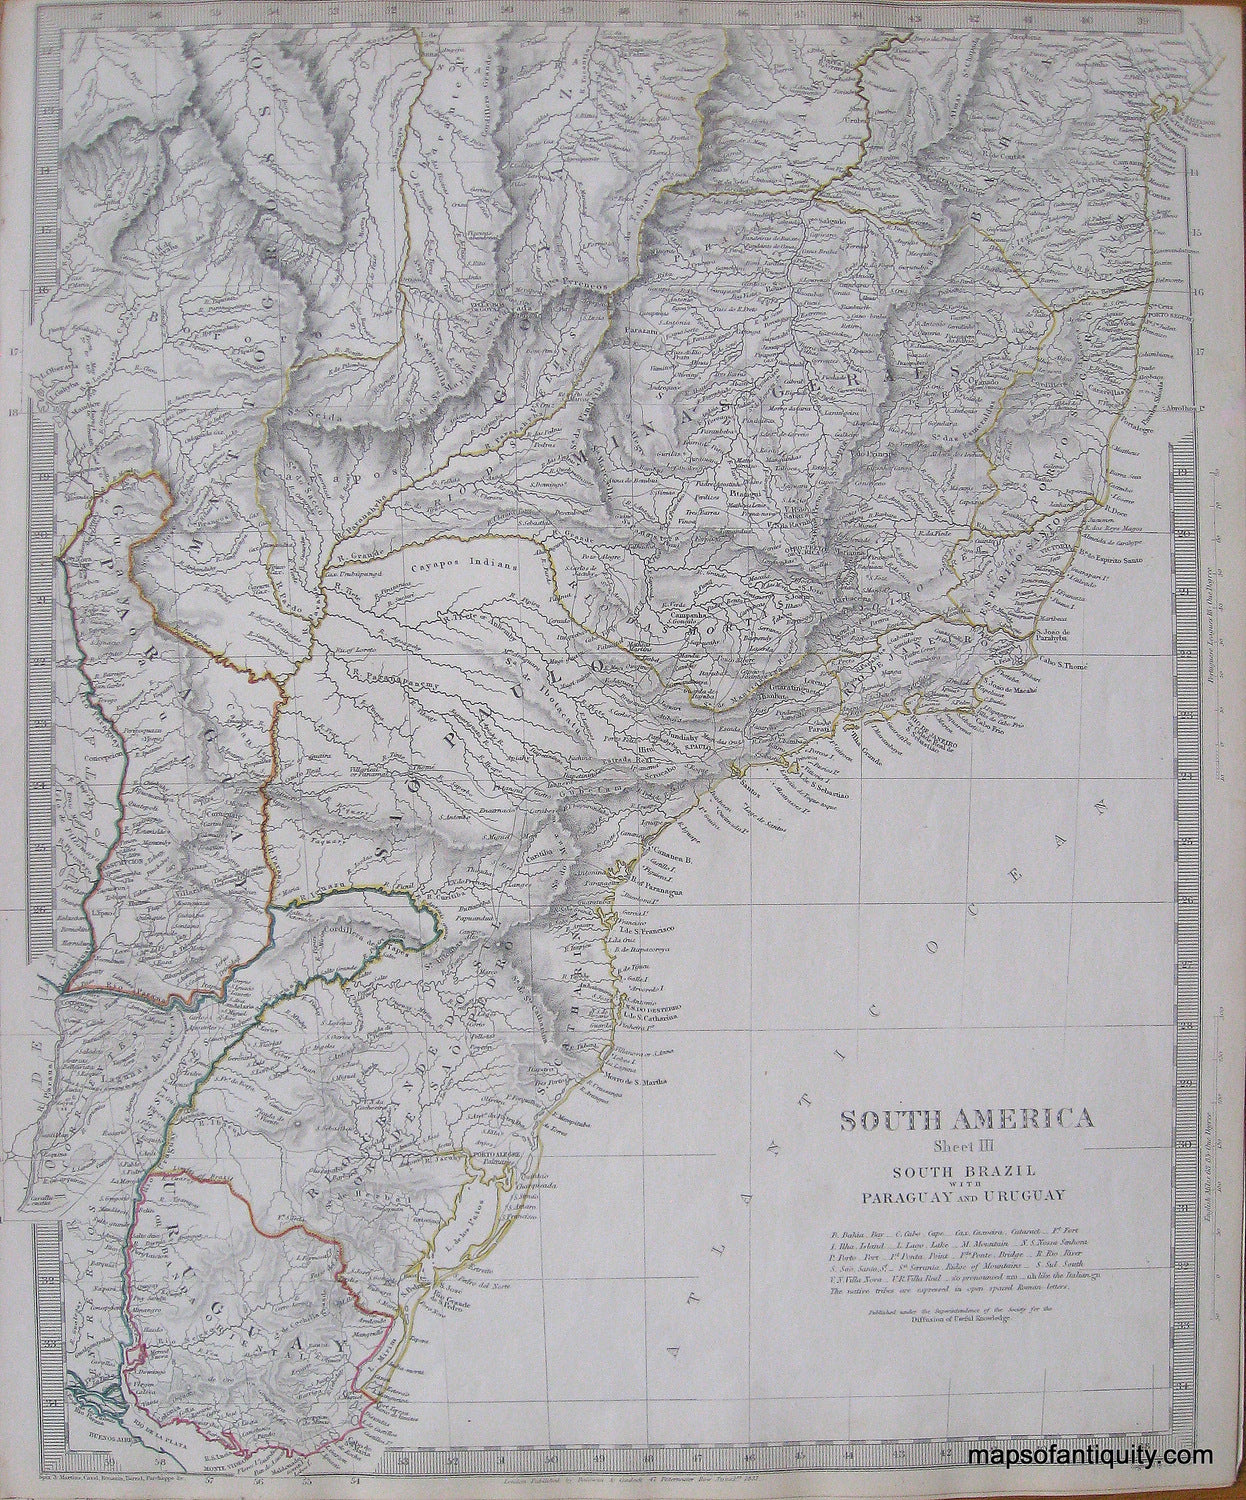 Antique-Hand-Colored-Map-South-America-III-South-Brazil-with-Paraguay-and-Uruguay-South-America--1837-SDUK/-Society-for-the-Diffusion-of-Useful-Knowledge-Maps-Of-Antiquity